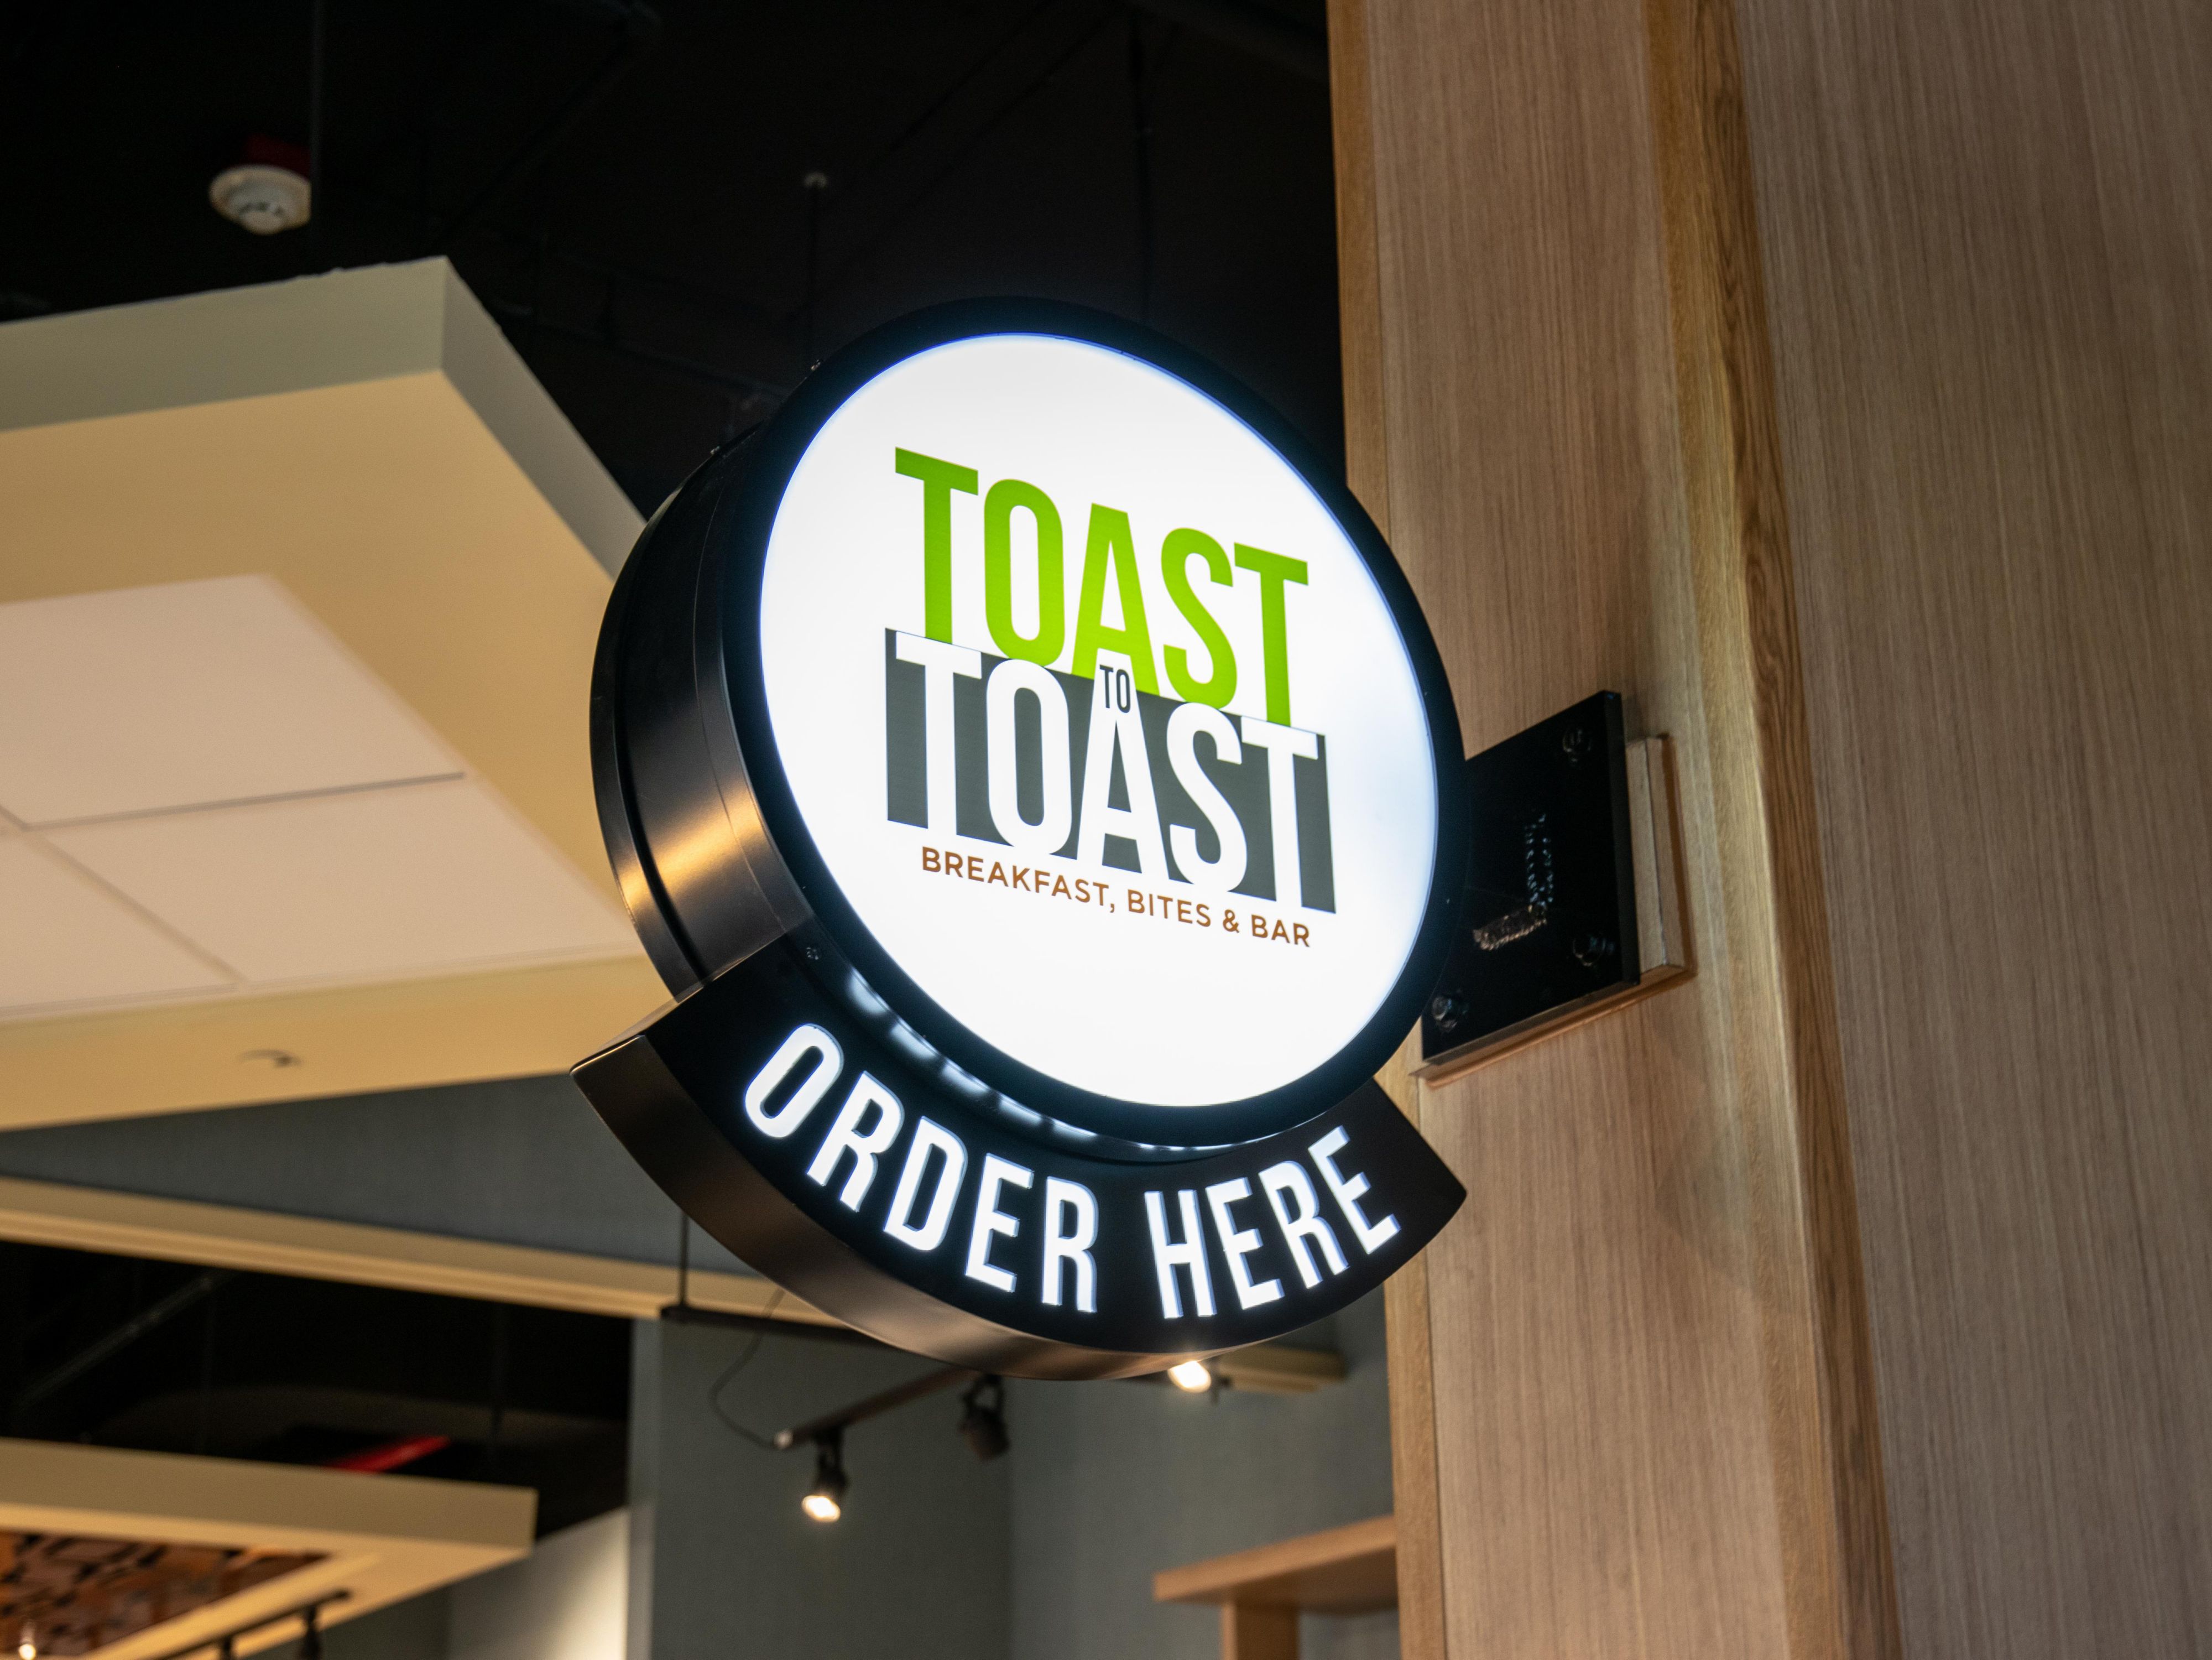 Experience our Toast to Toast restaurant at the Holiday Inn Downtown Seattle. Enjoy our breakfasts, sandwiches, and salads or end the day with a variety of beer sections on tap in the evenings.  
